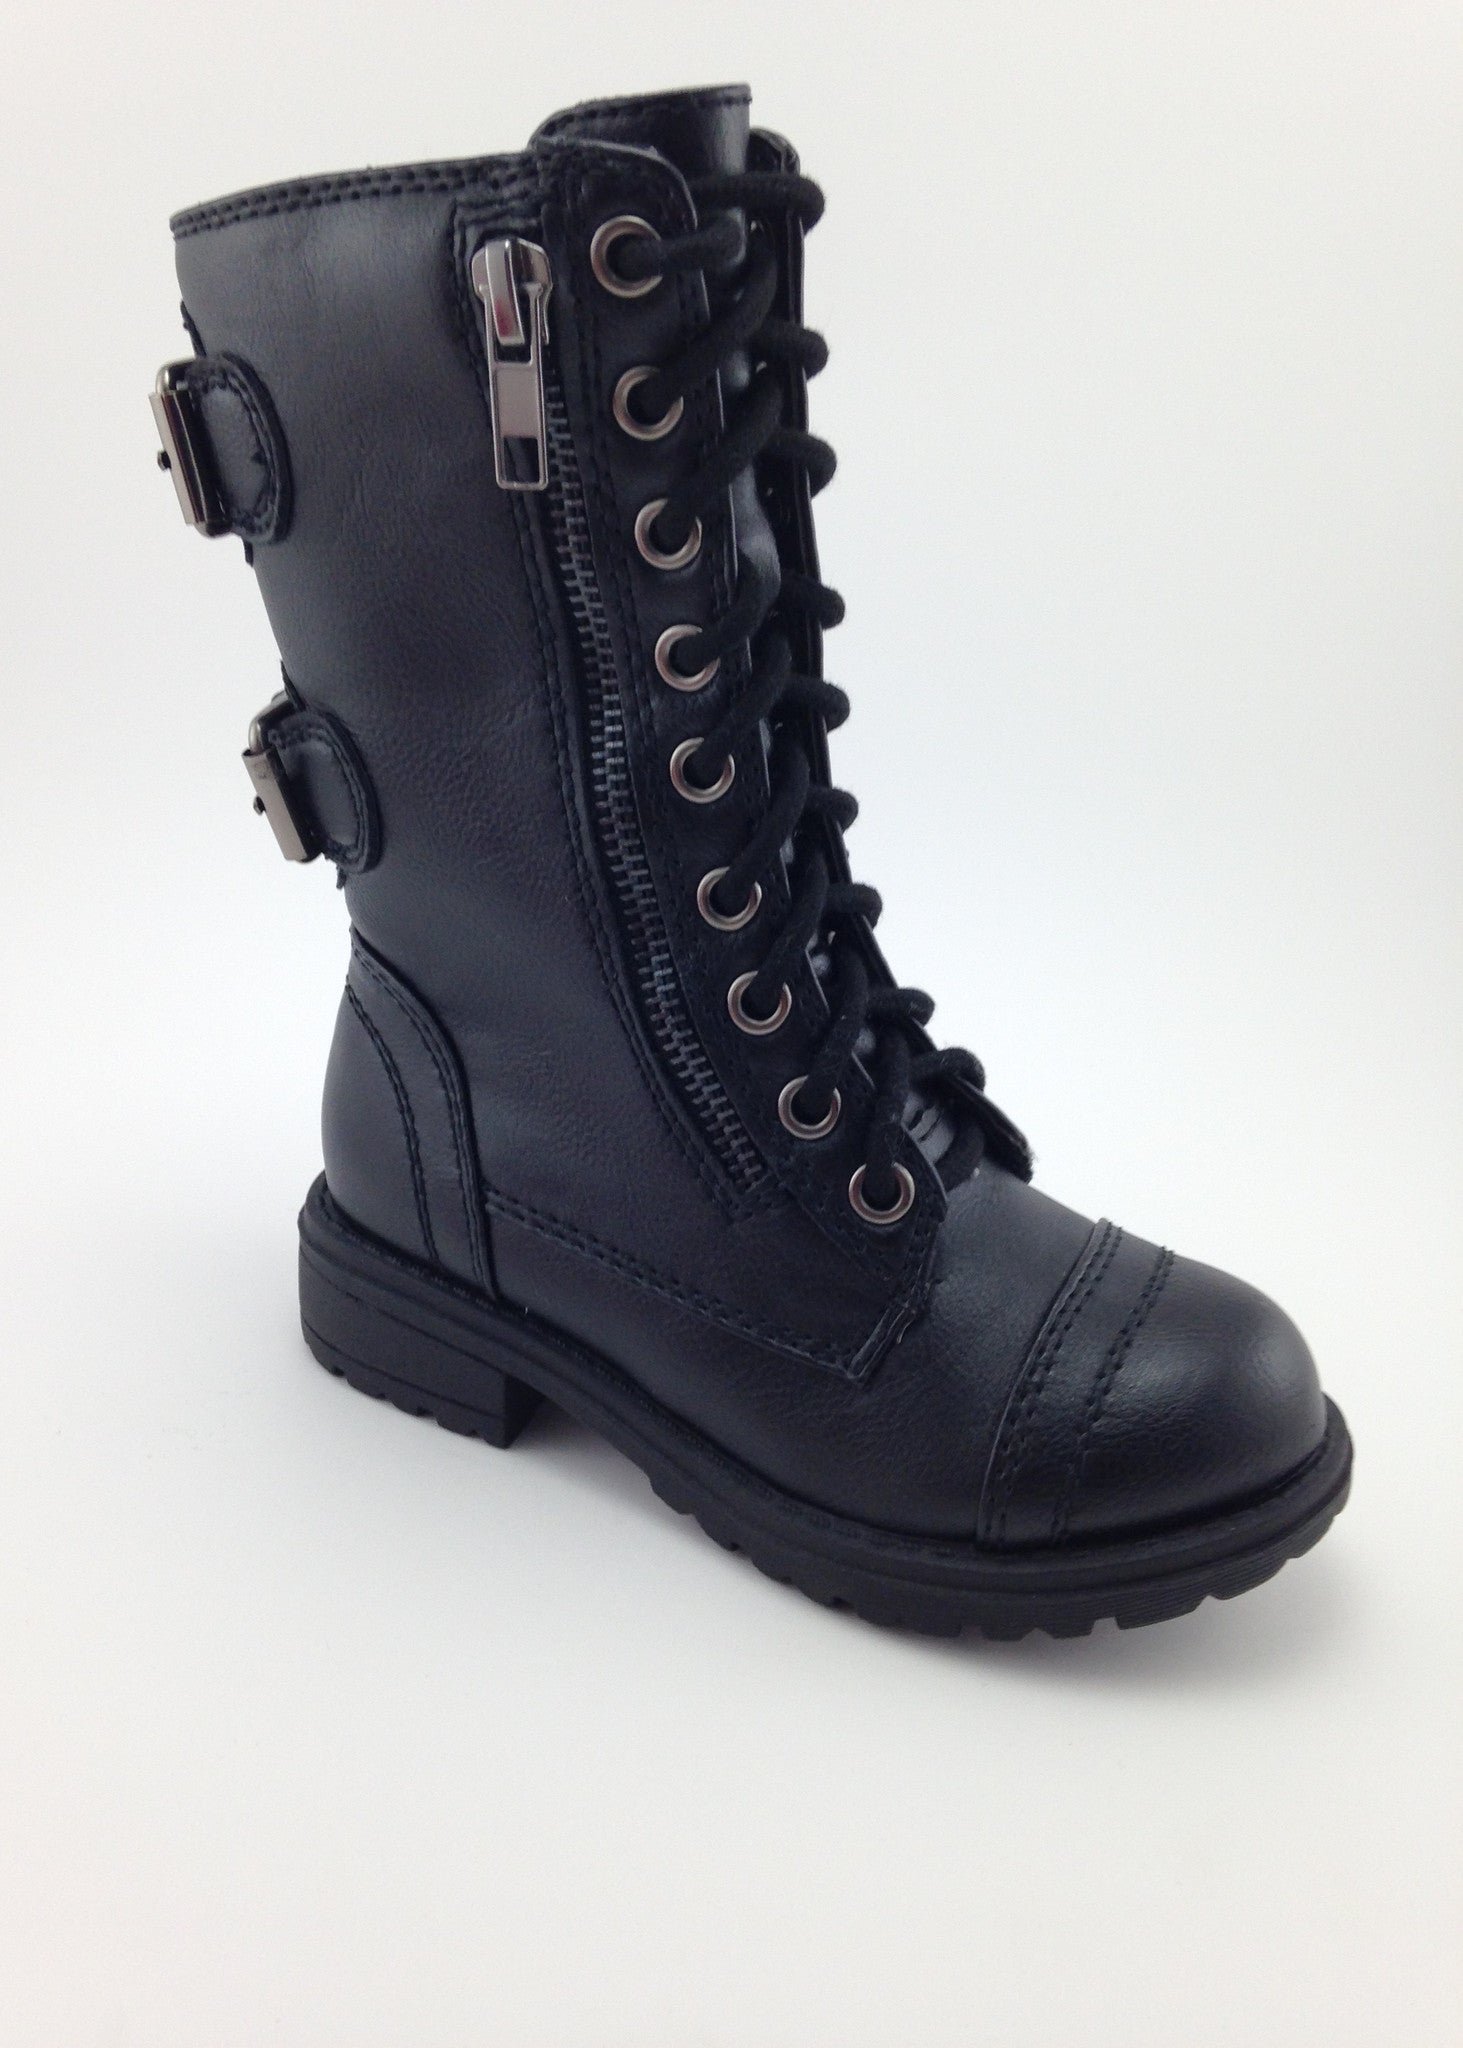 girls black military boots